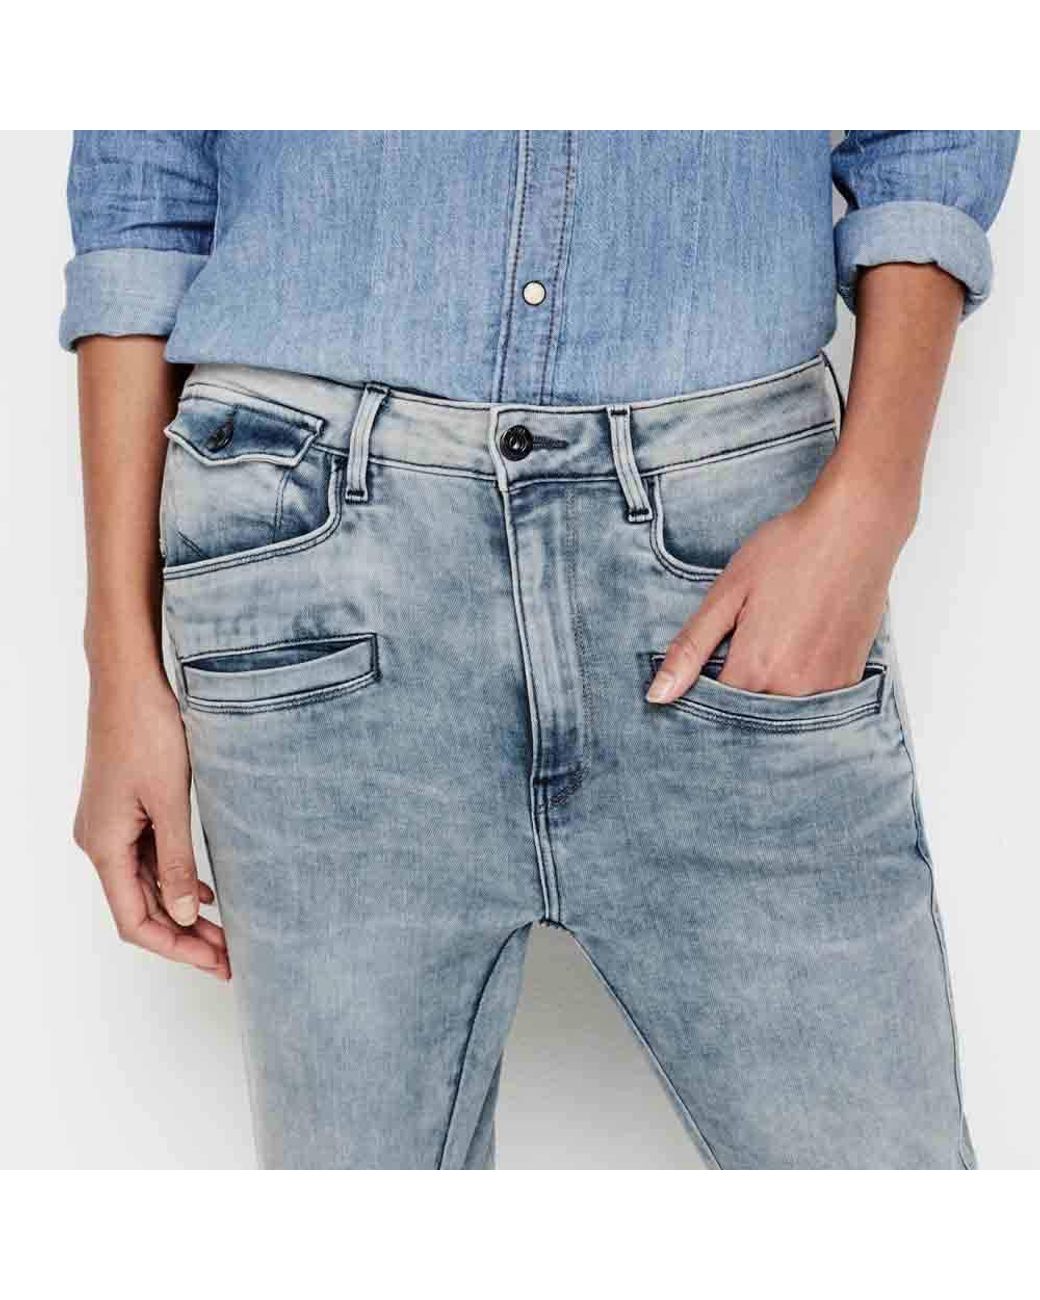 g star dadin jeans Cheaper Than Retail Price> Buy Clothing, Accessories and  lifestyle products for women & men -